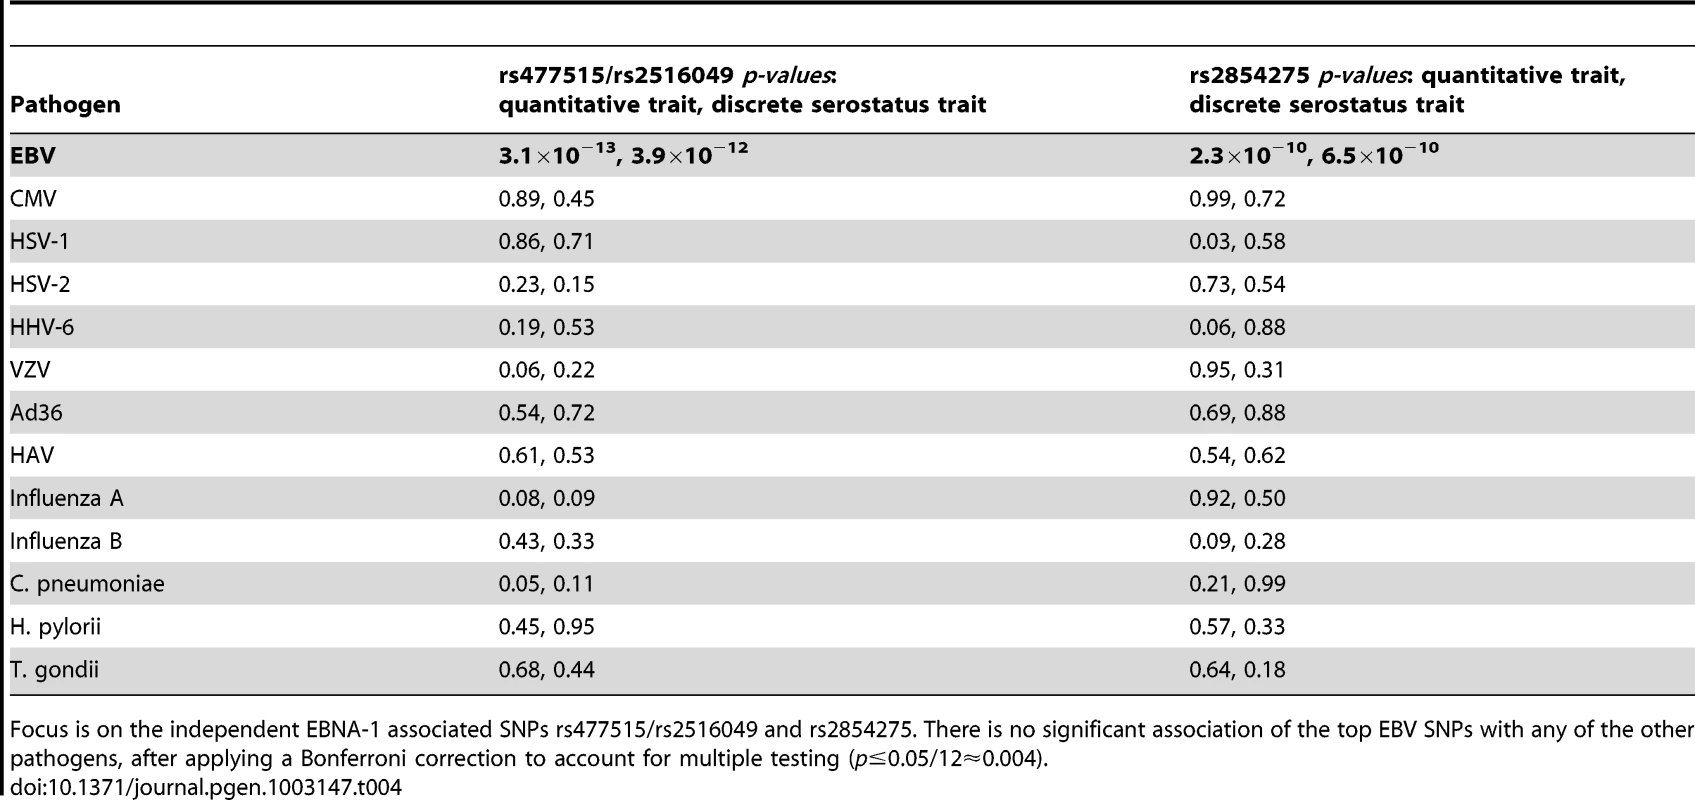 Association (conditional on linkage) results for 12 comparative pathogens.